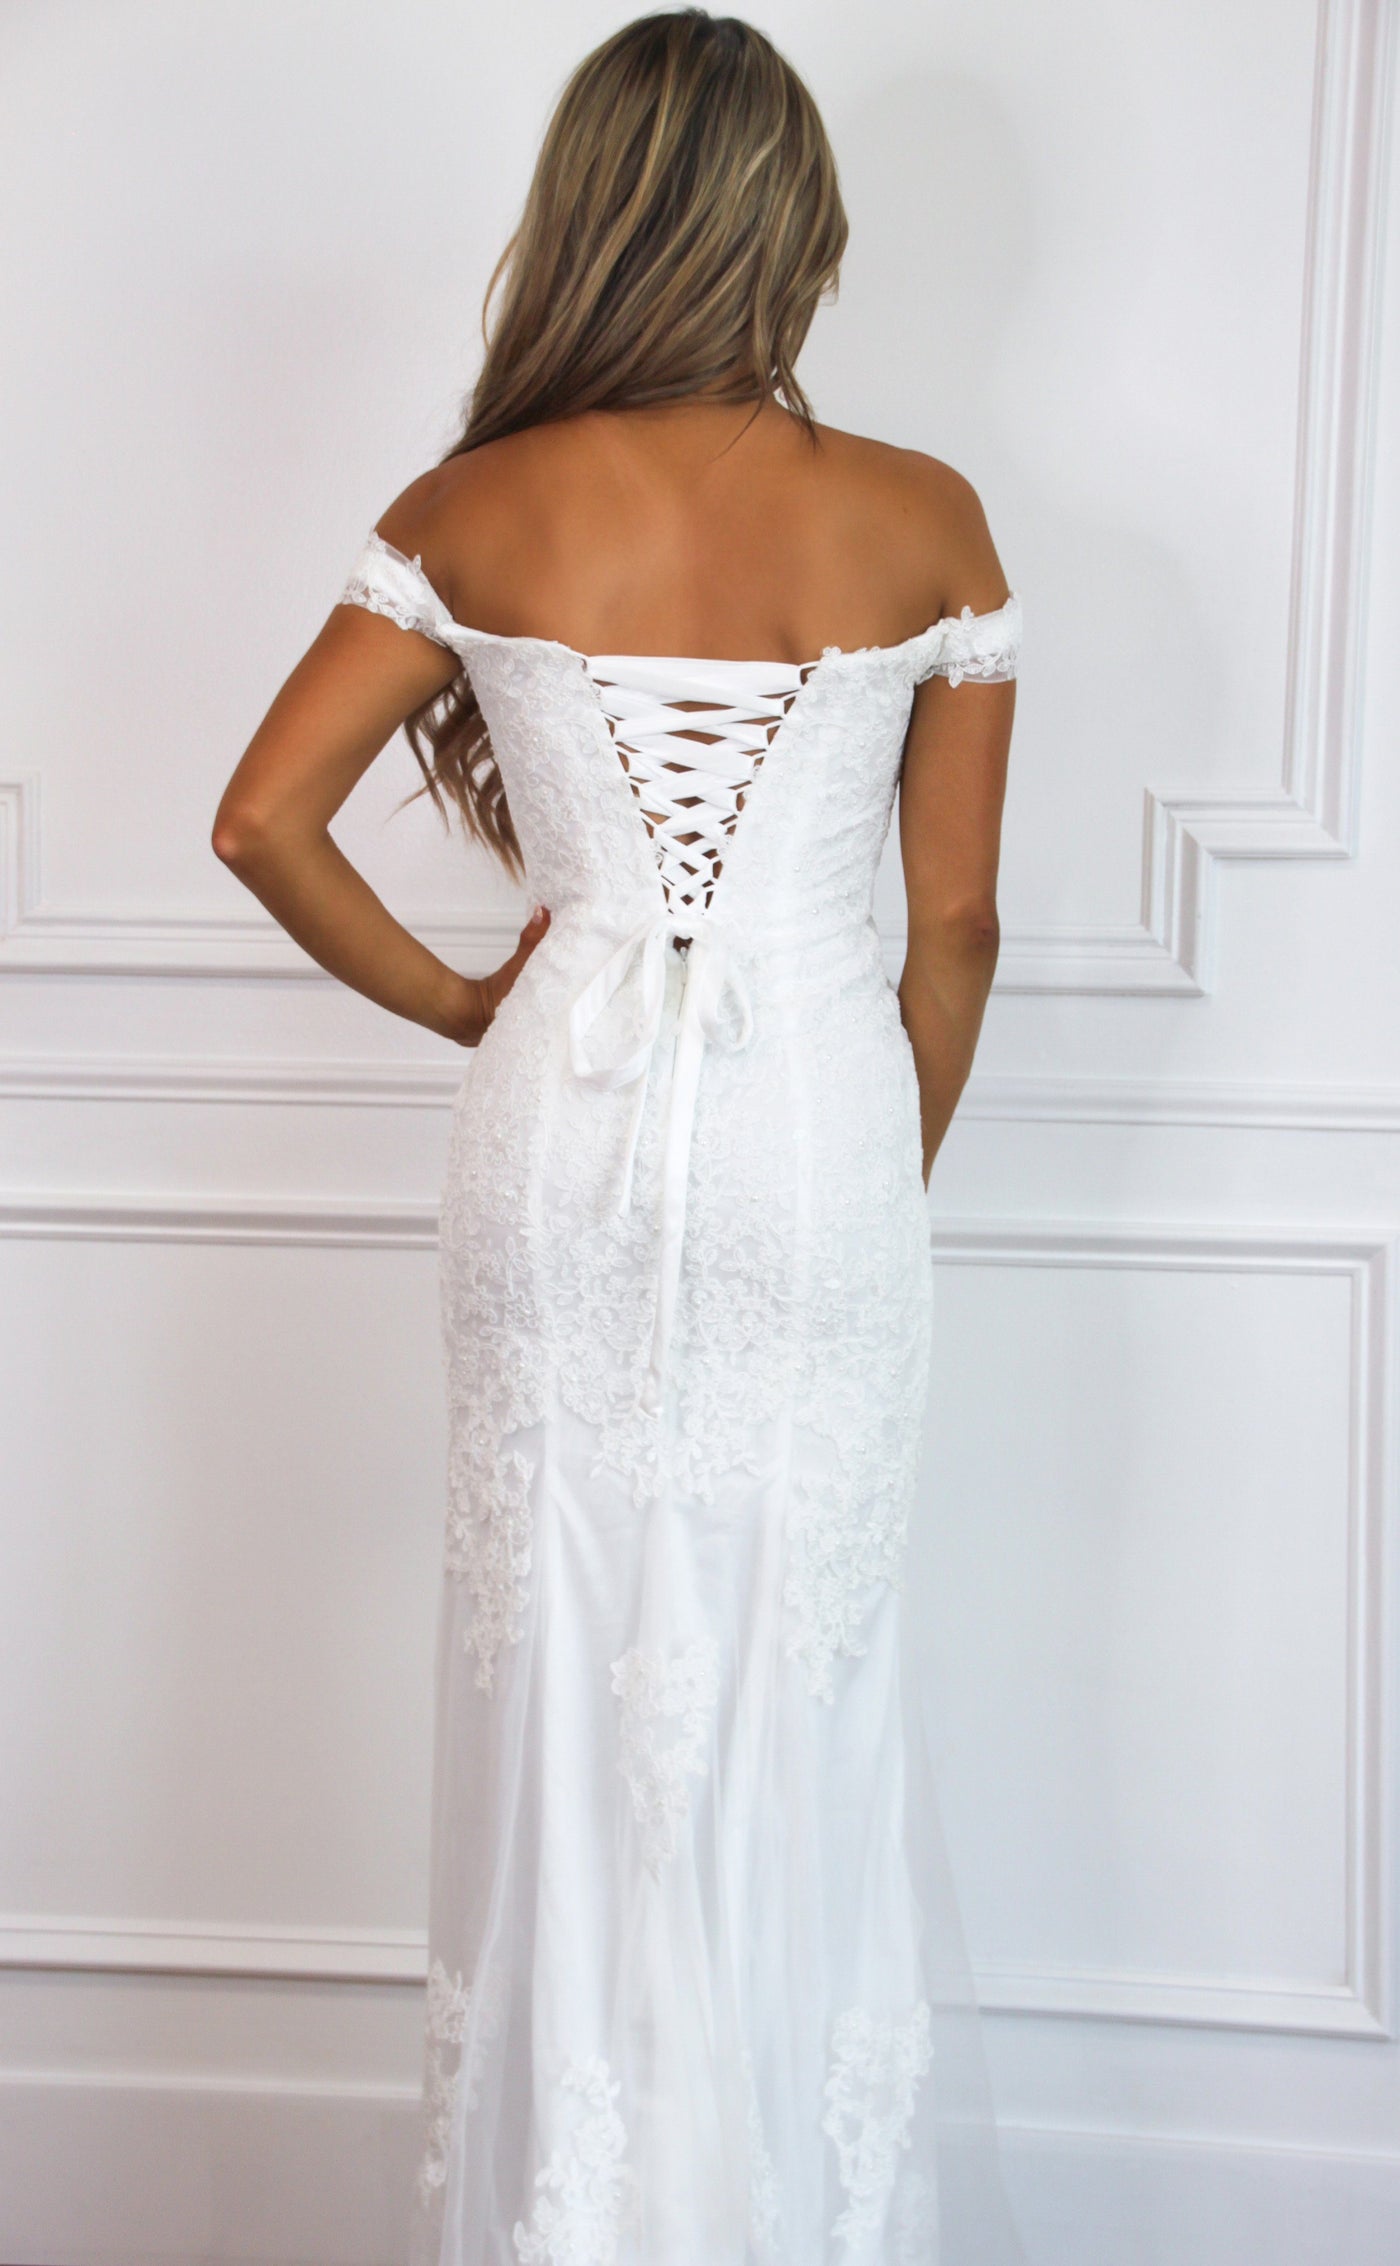 Laced in Love Off Shoulder Wedding Dress: White - Bella and Bloom Boutique